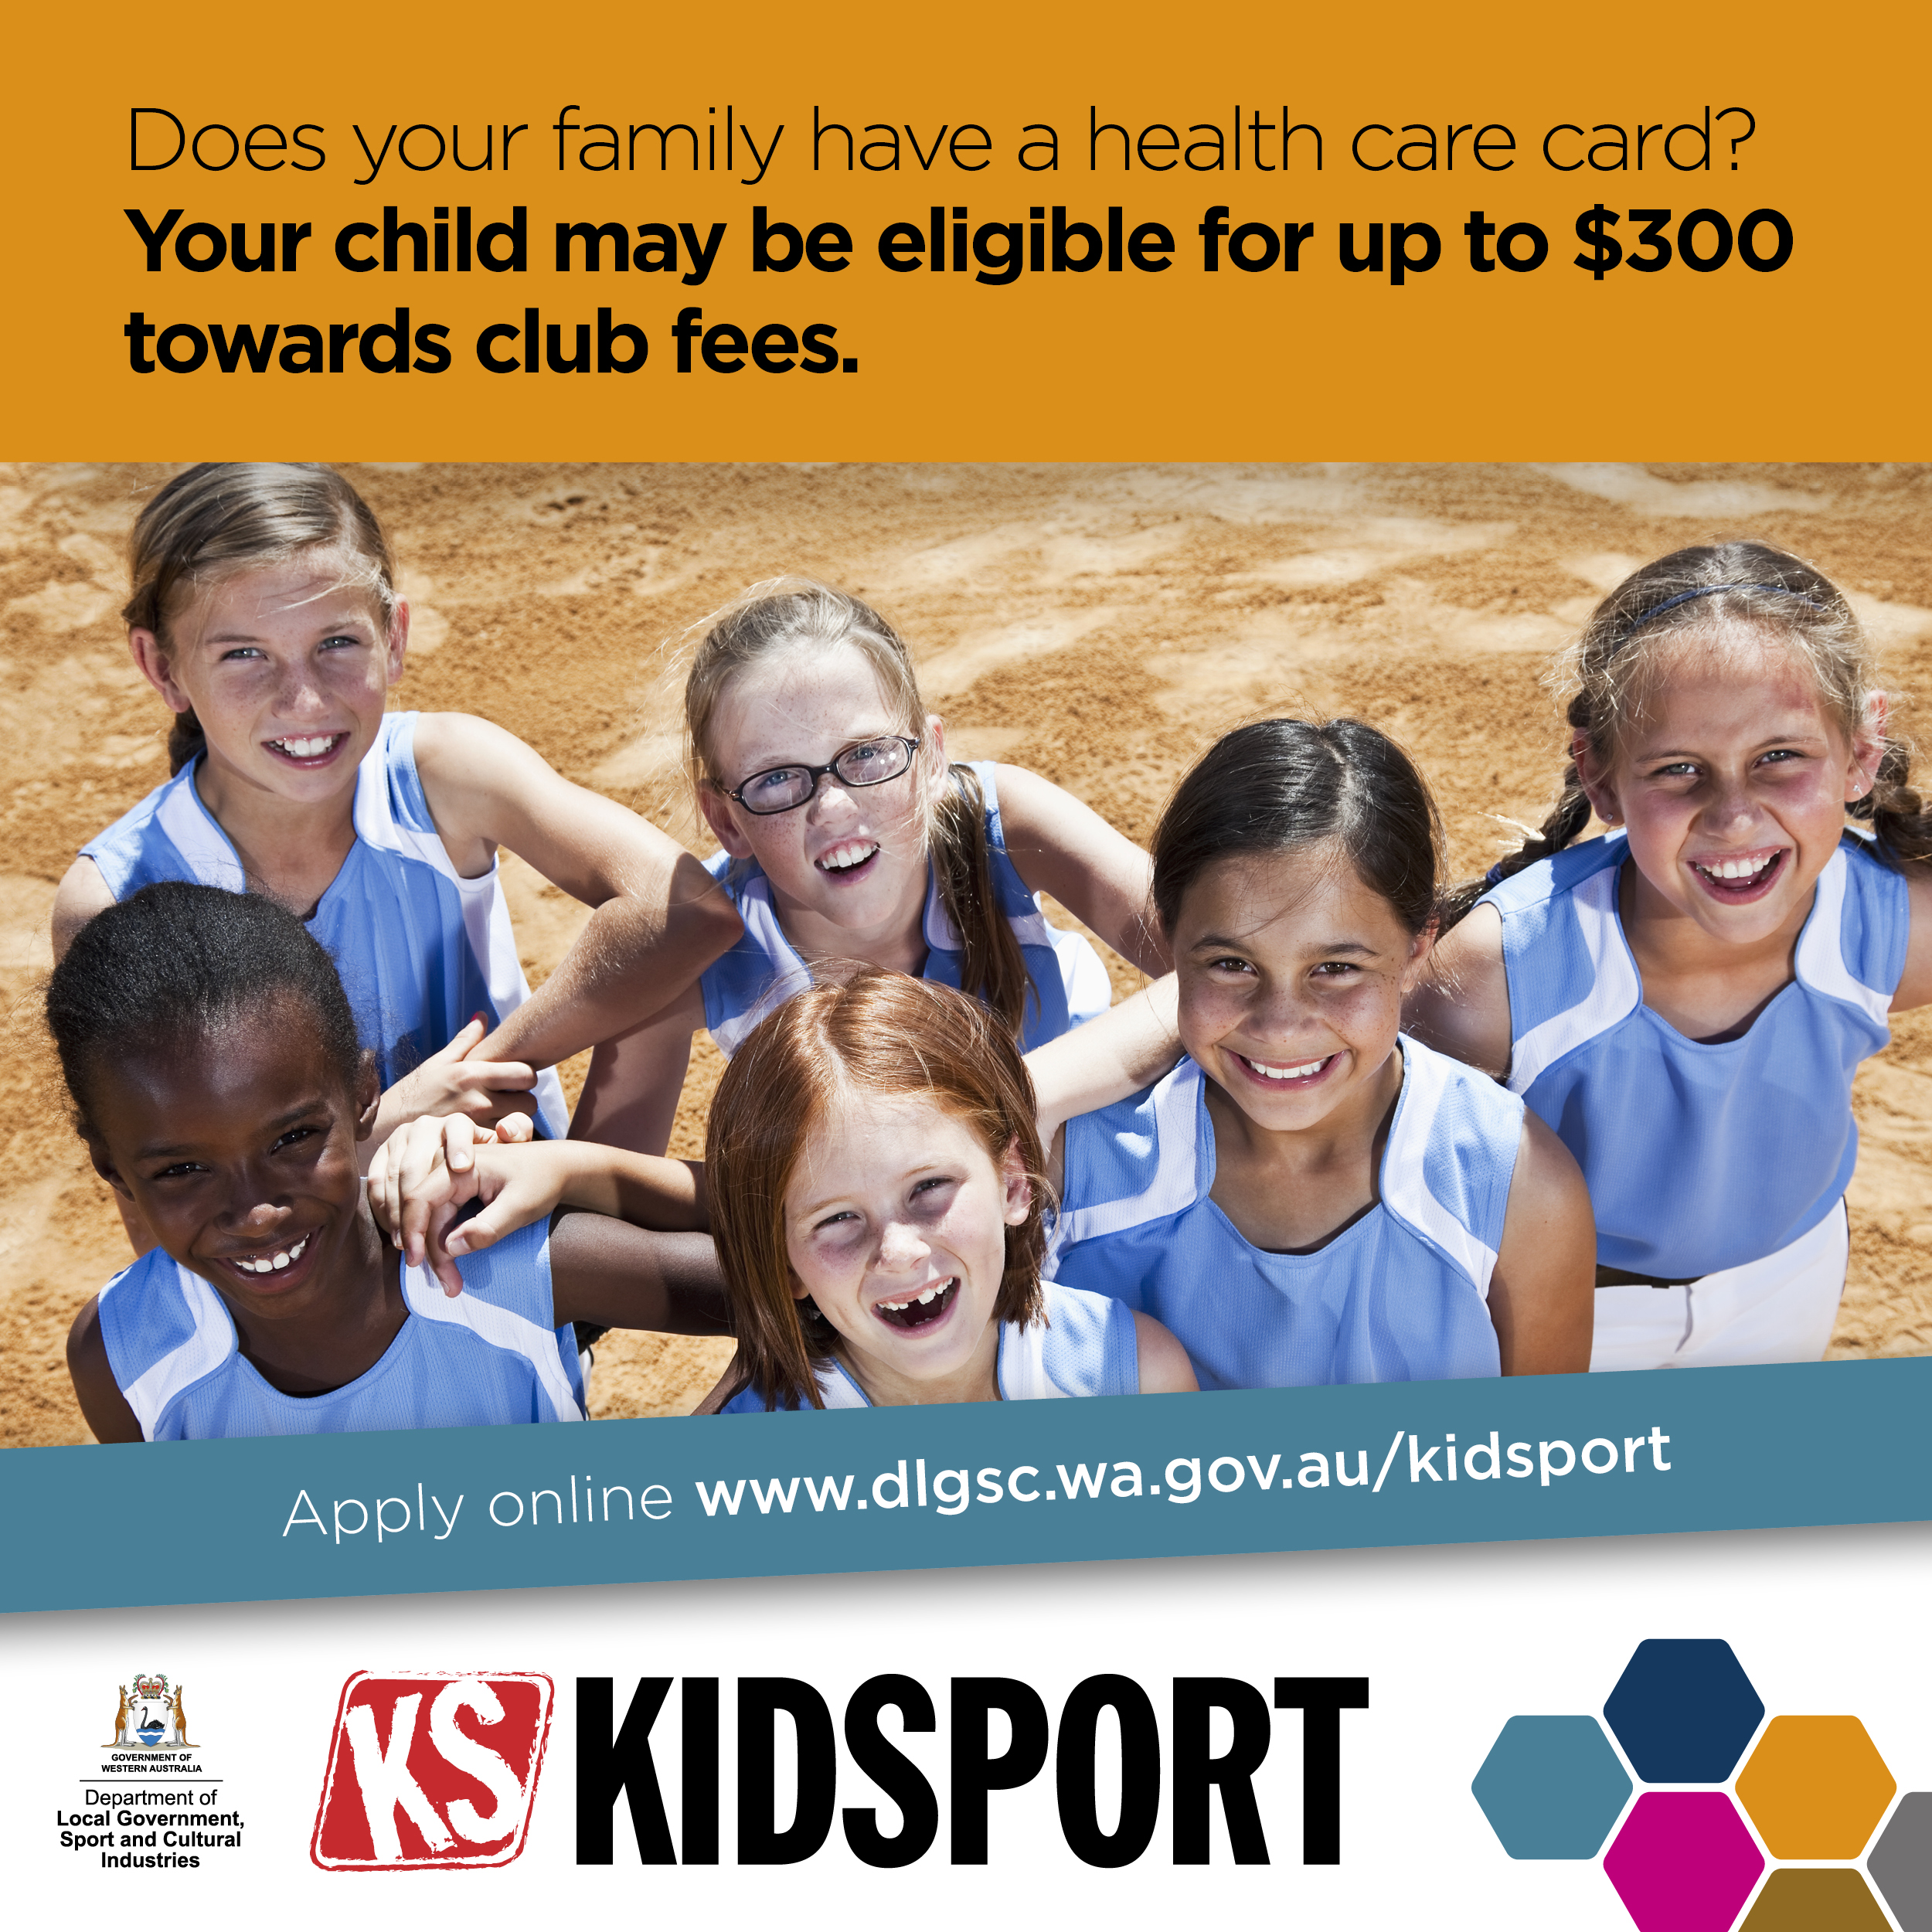 Graphic social media tile promoting KidSport to parents and families